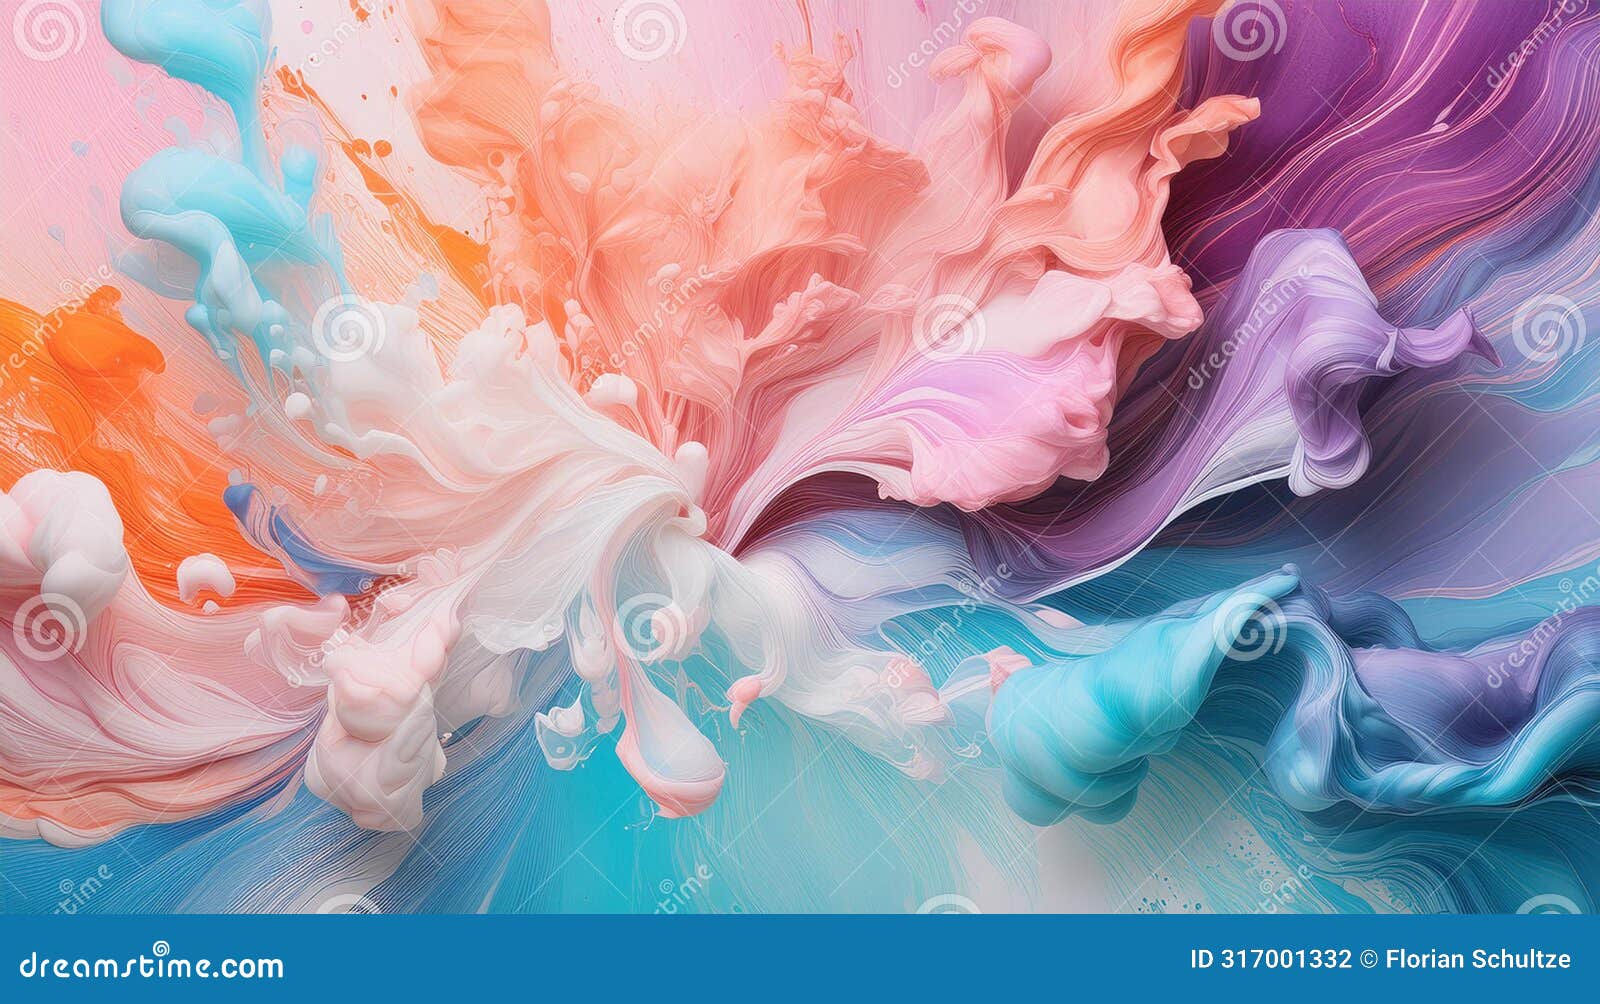 a dynamic burst of pastel colors spills across the canvas, evoking energy